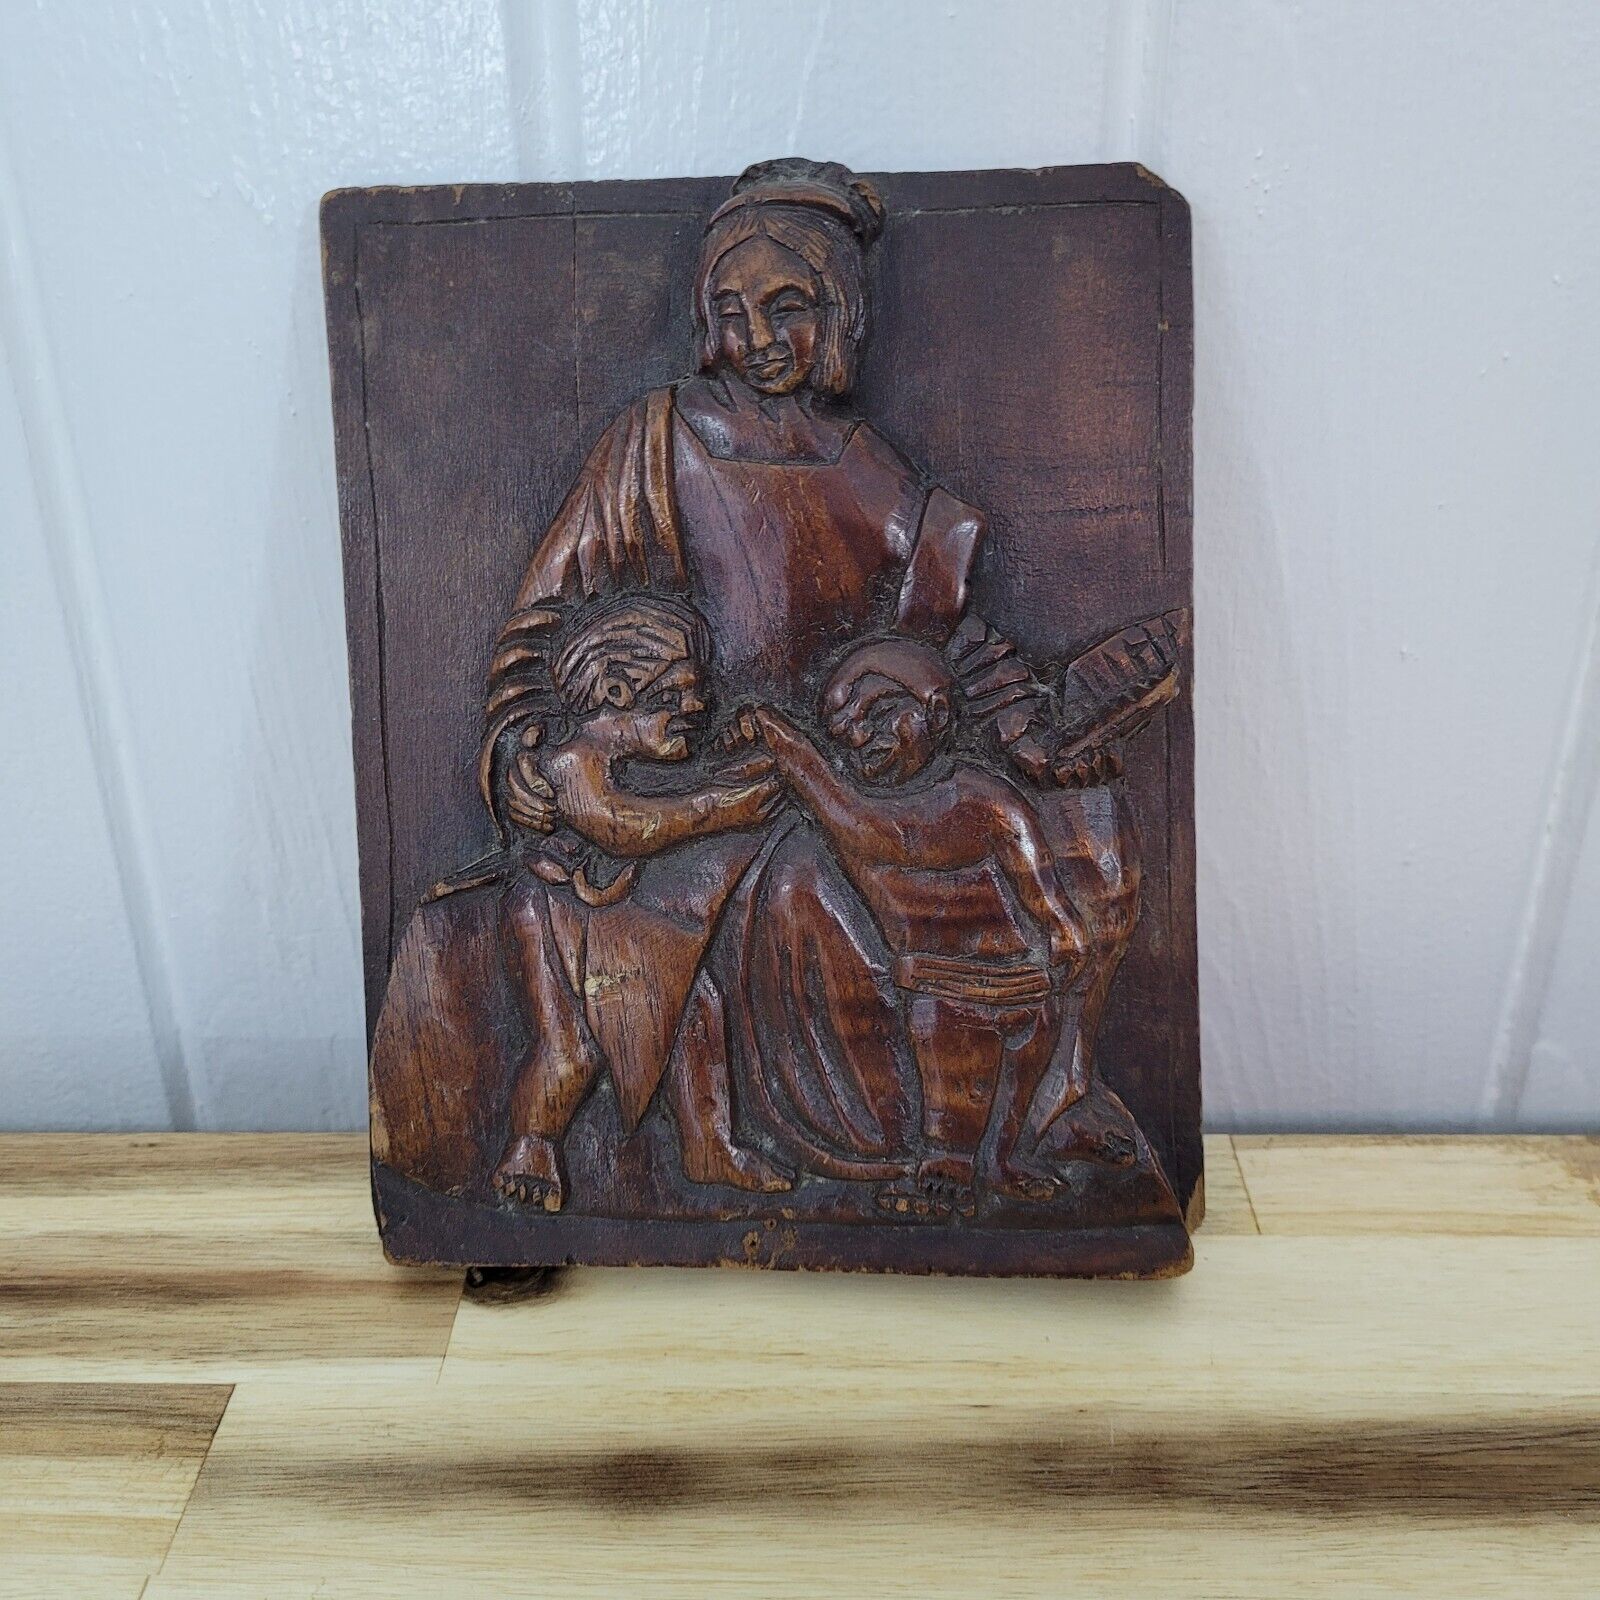 Figural Victorian Era Wood Relief Wall Plaque Antique French Tribal Wooden Art